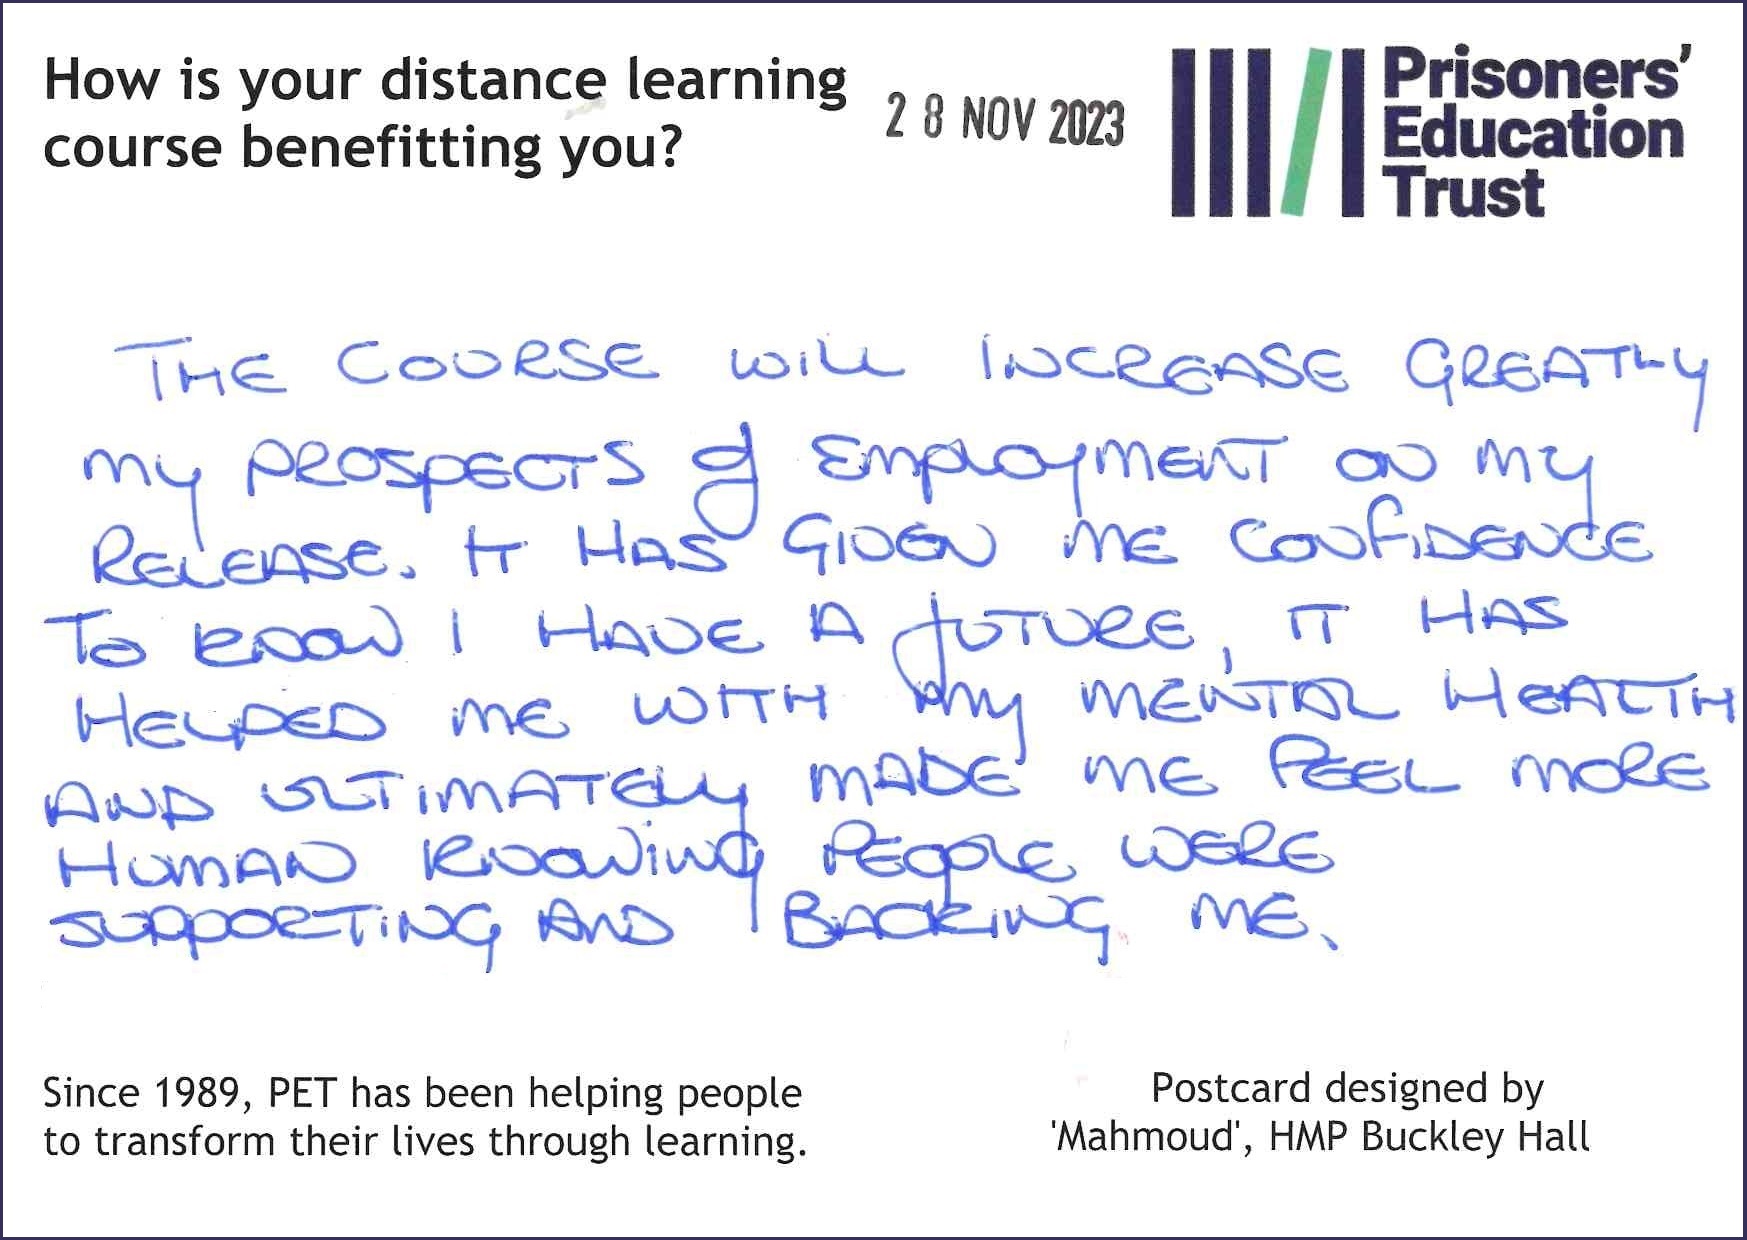 Handwritten quote from learner: "The course will increase greatly my prospects of employment on my release. It has given me confidence to know I have a future, it has helped me with my mental health and ultimately made me feel more human knowing people were supporting and backing me."